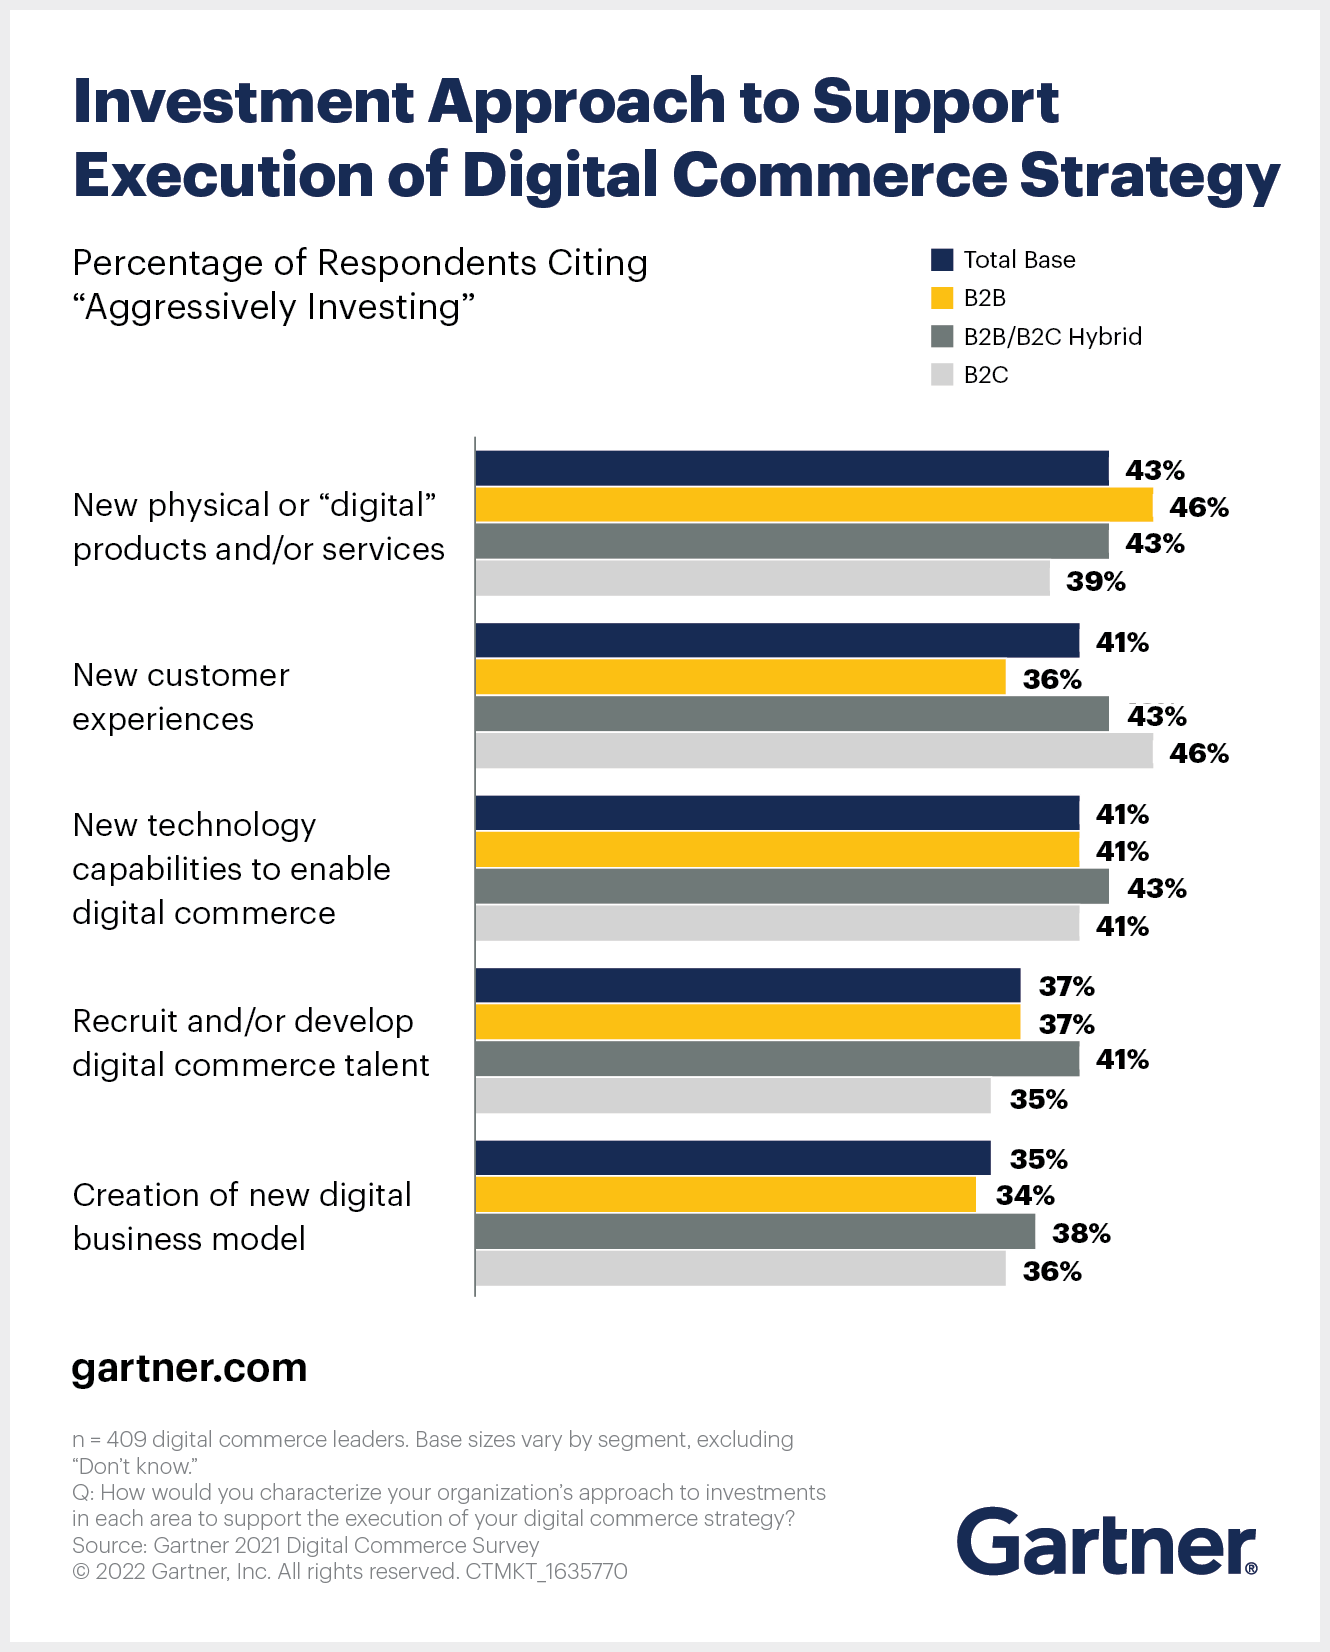 Digital commerce leaders are investing in a range of initiatives to drive business.